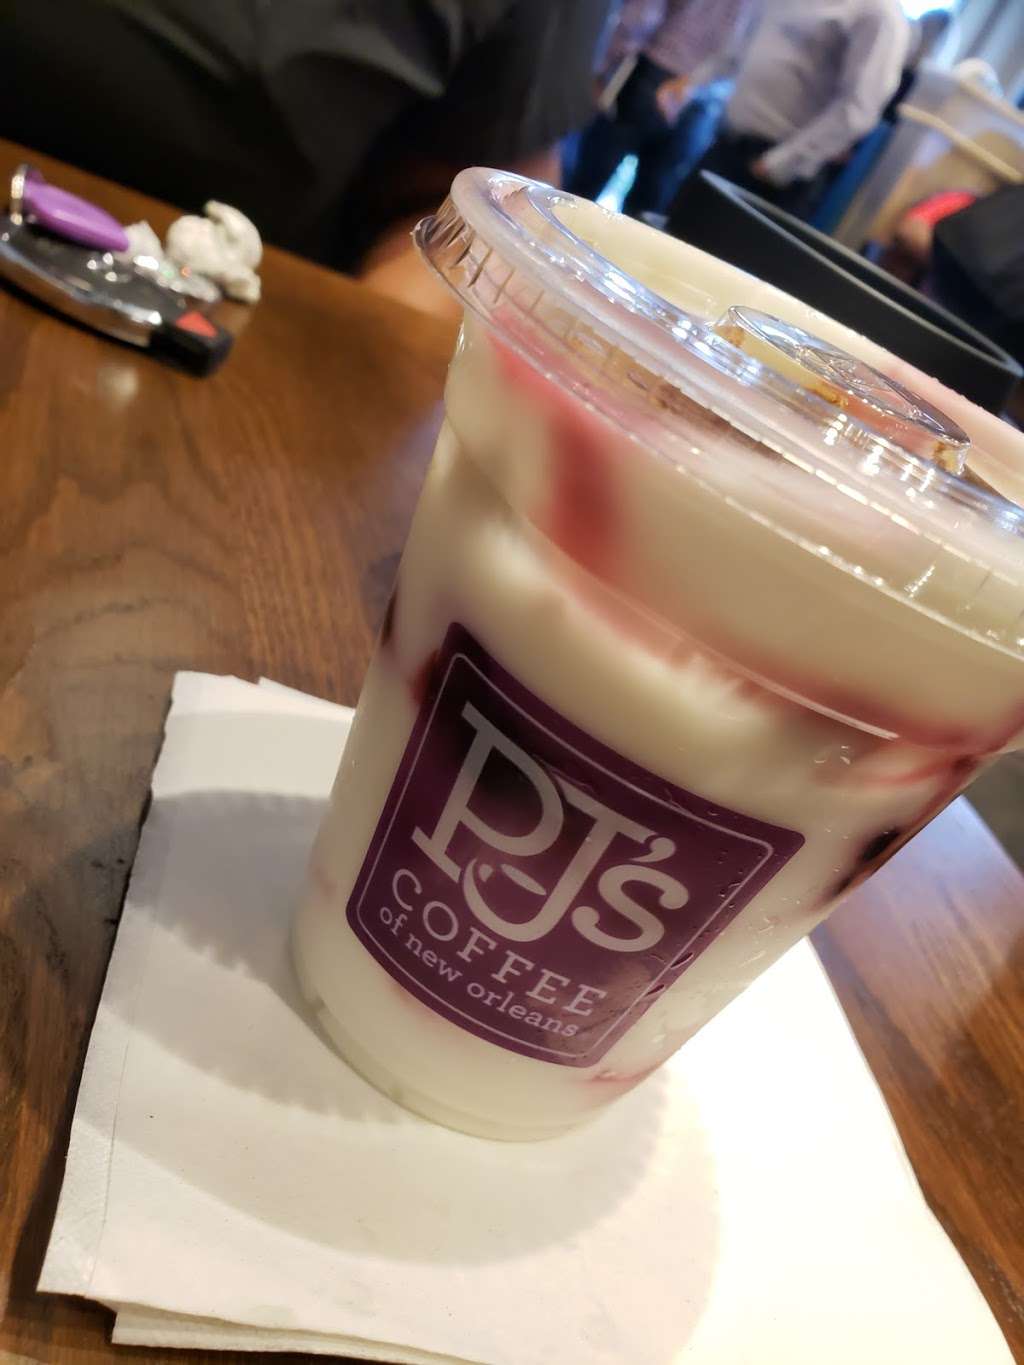 PJs Coffee of New Orleans | 12640 Broadway St, Pearland, TX 77584, USA | Phone: (832) 406-7350